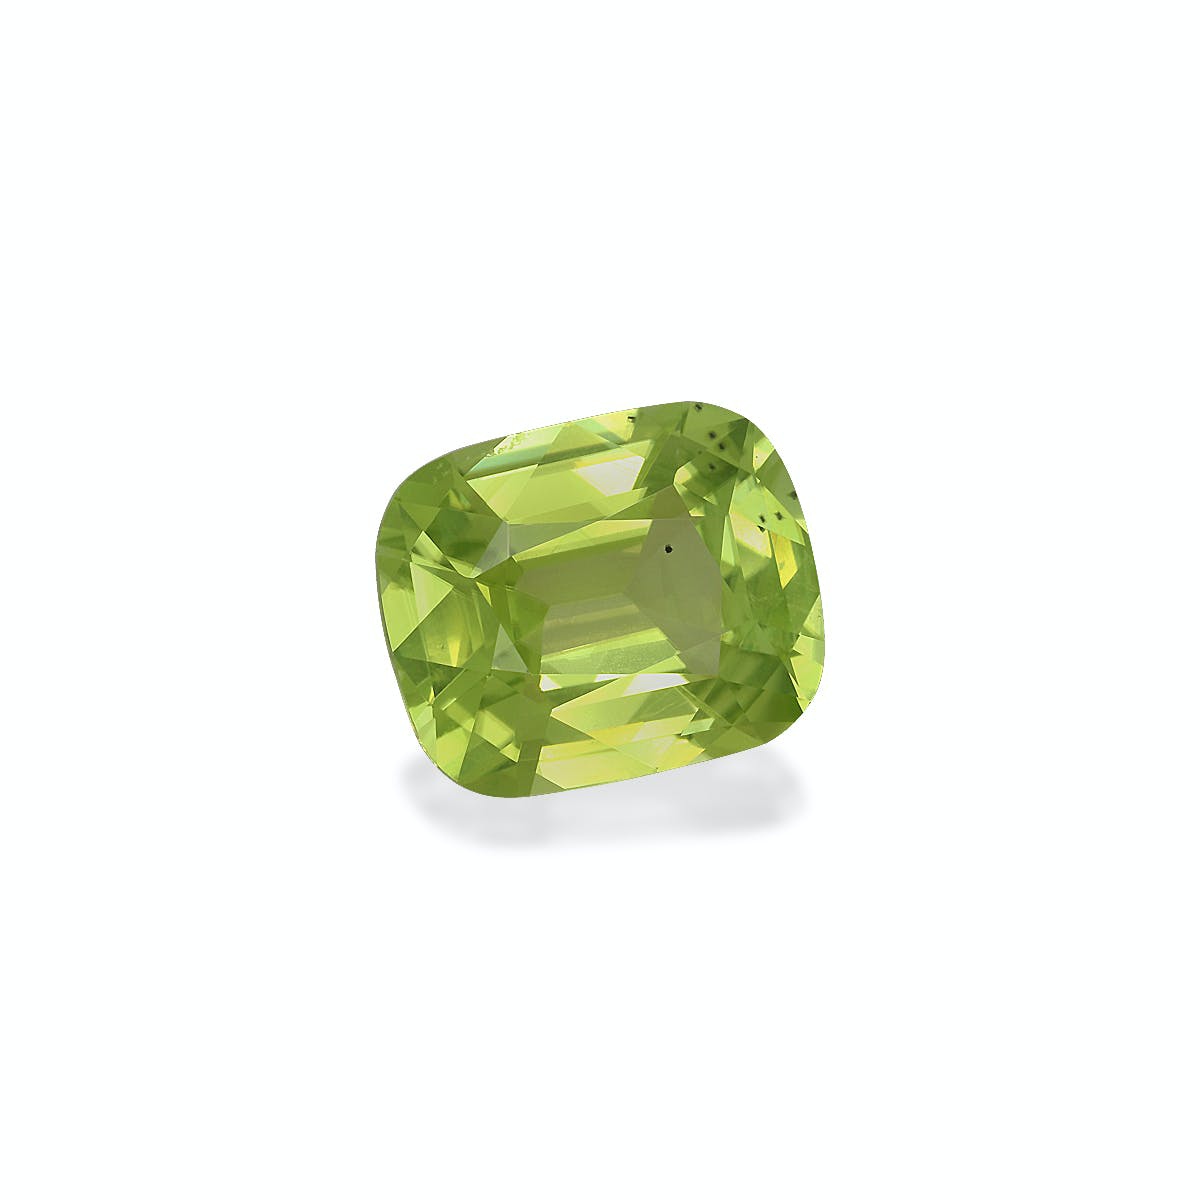 Picture of Pistachio Green Peridot 4.59ct - 11x9mm (PD0022)